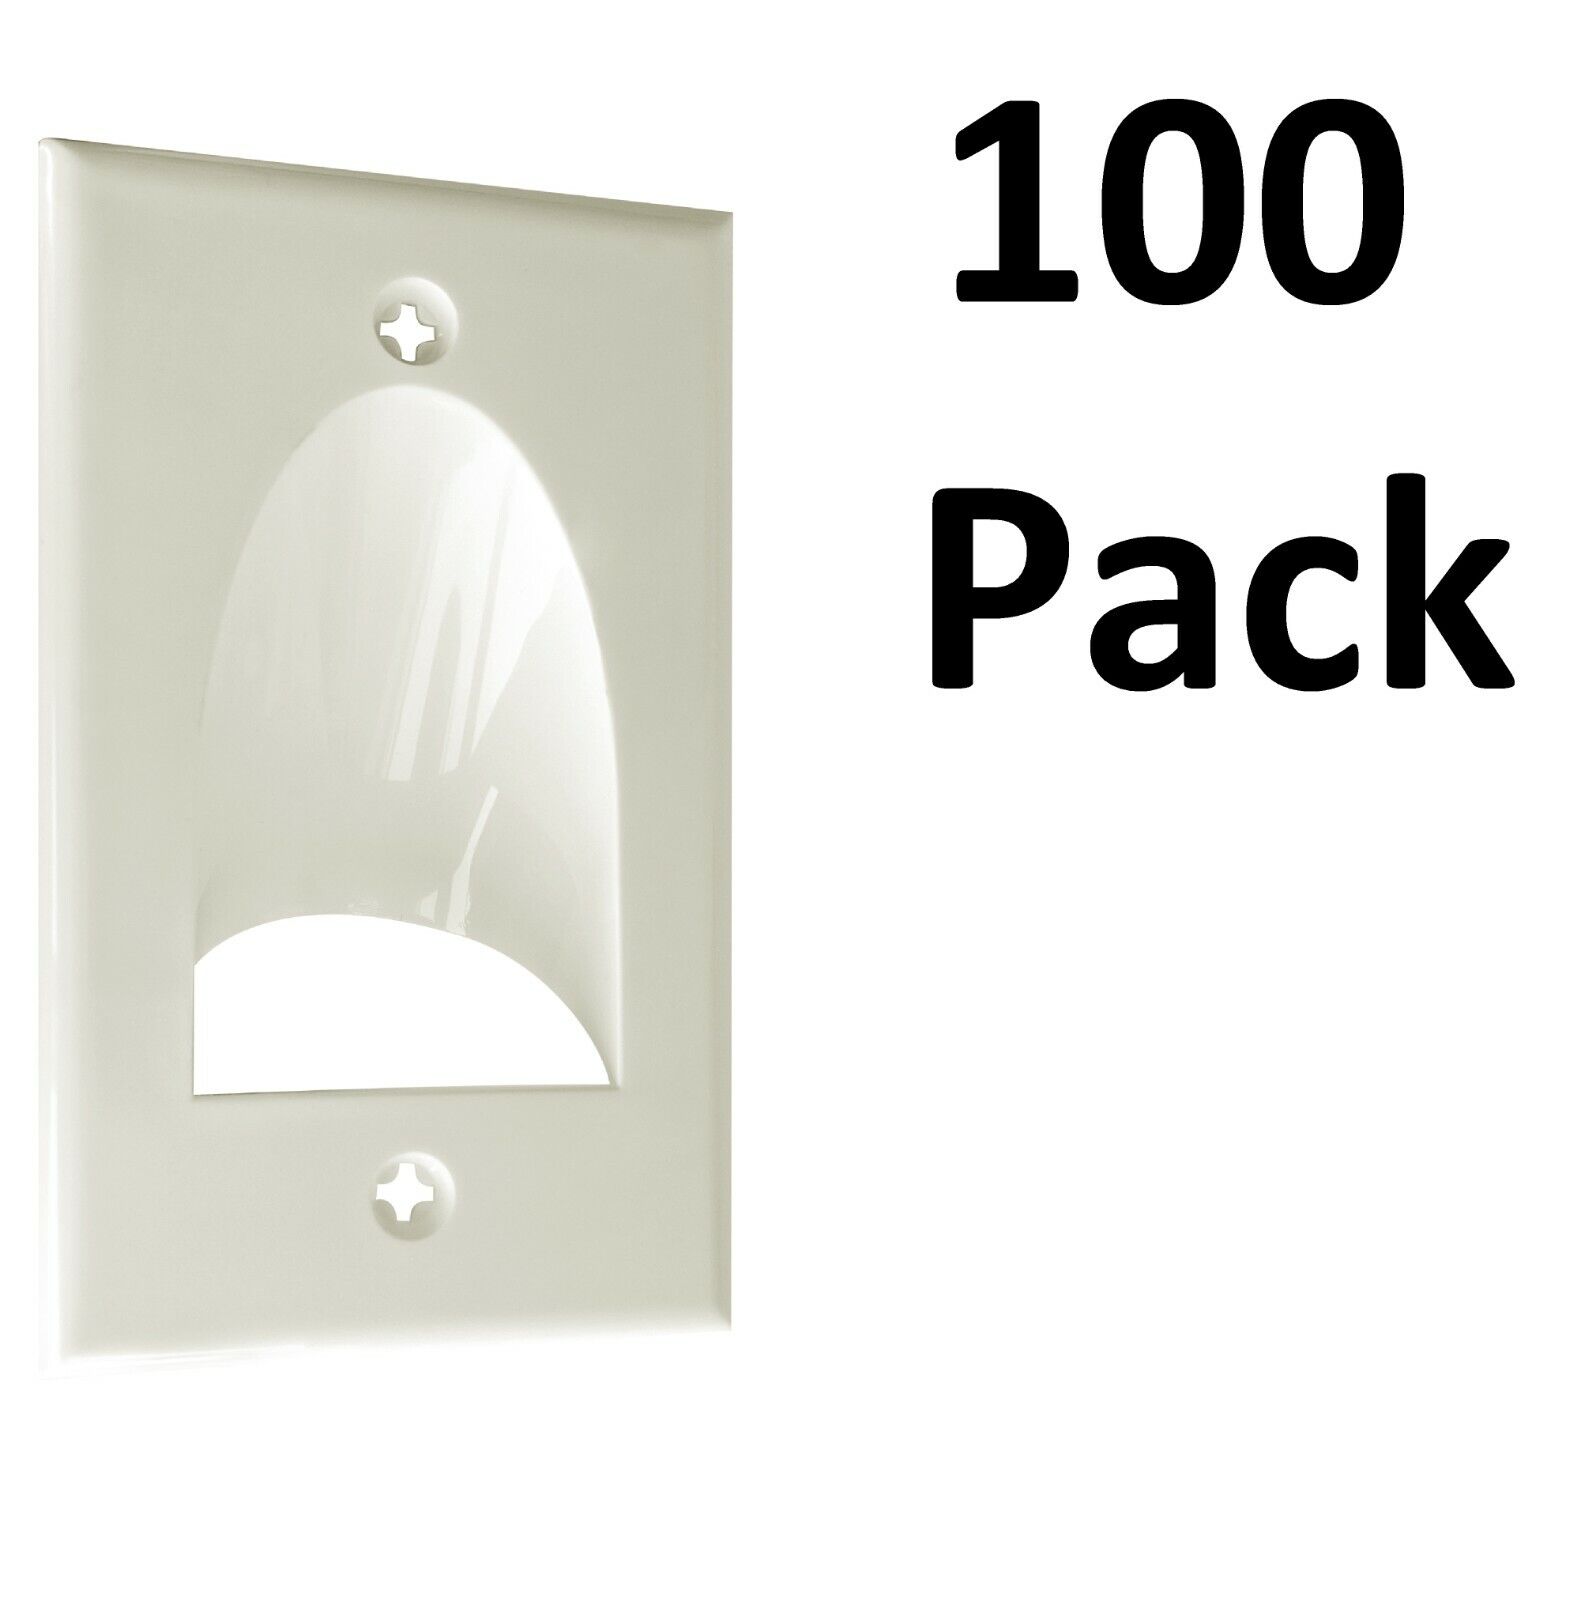 1-Gang Recessed Wall Plate Low Voltage Cable Pass Through-White Lot of 100 Pcs